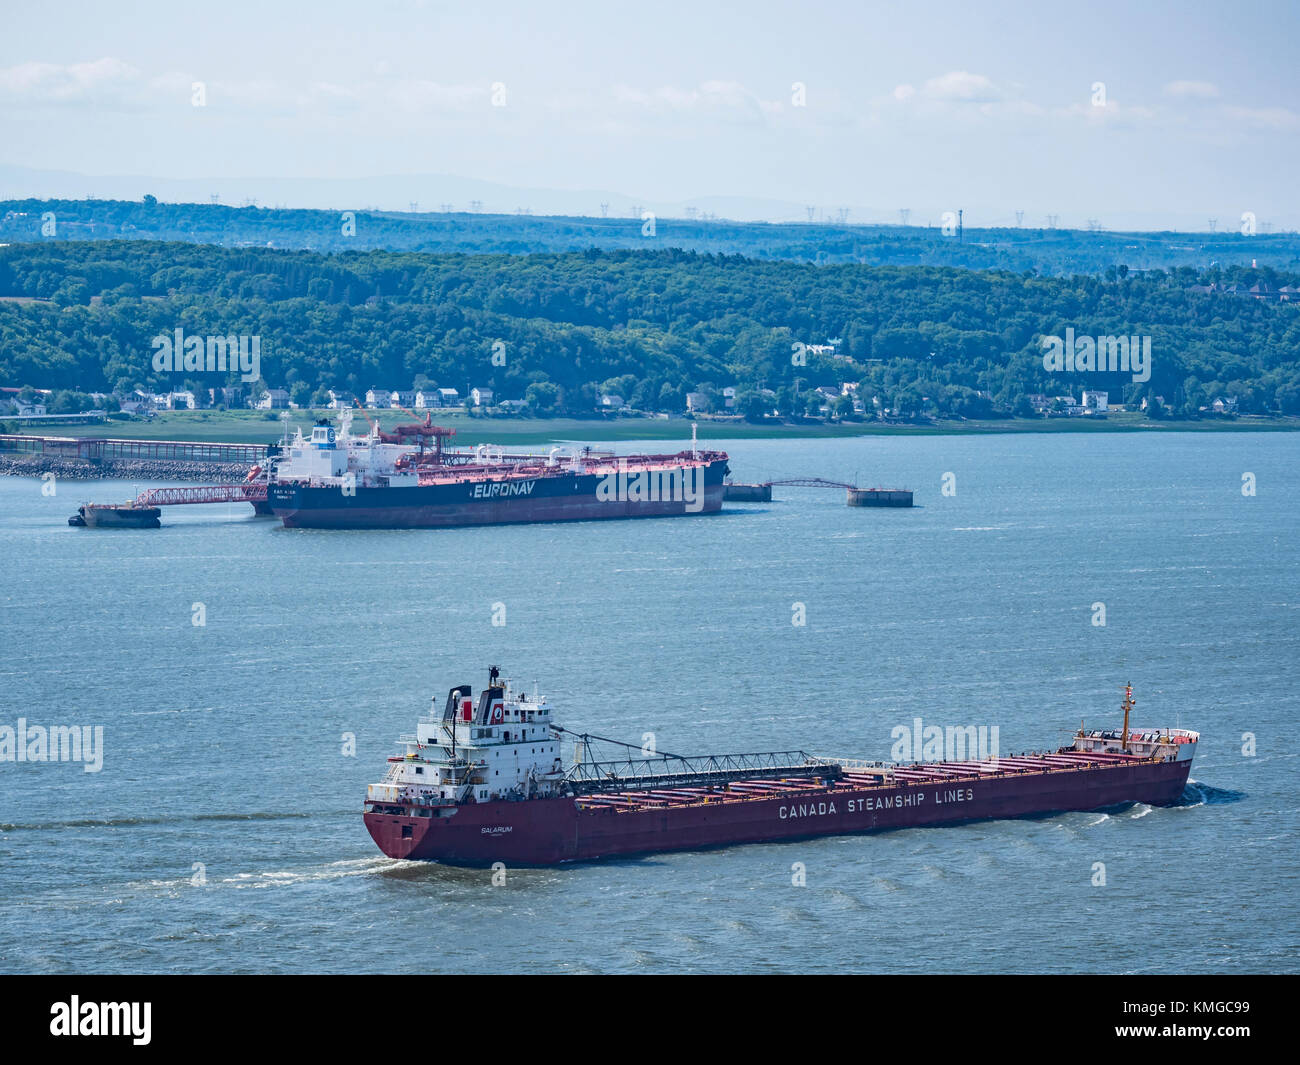 Cargo ships on the Saint Lawrence River, Quebec City, Canada. Stock Photo